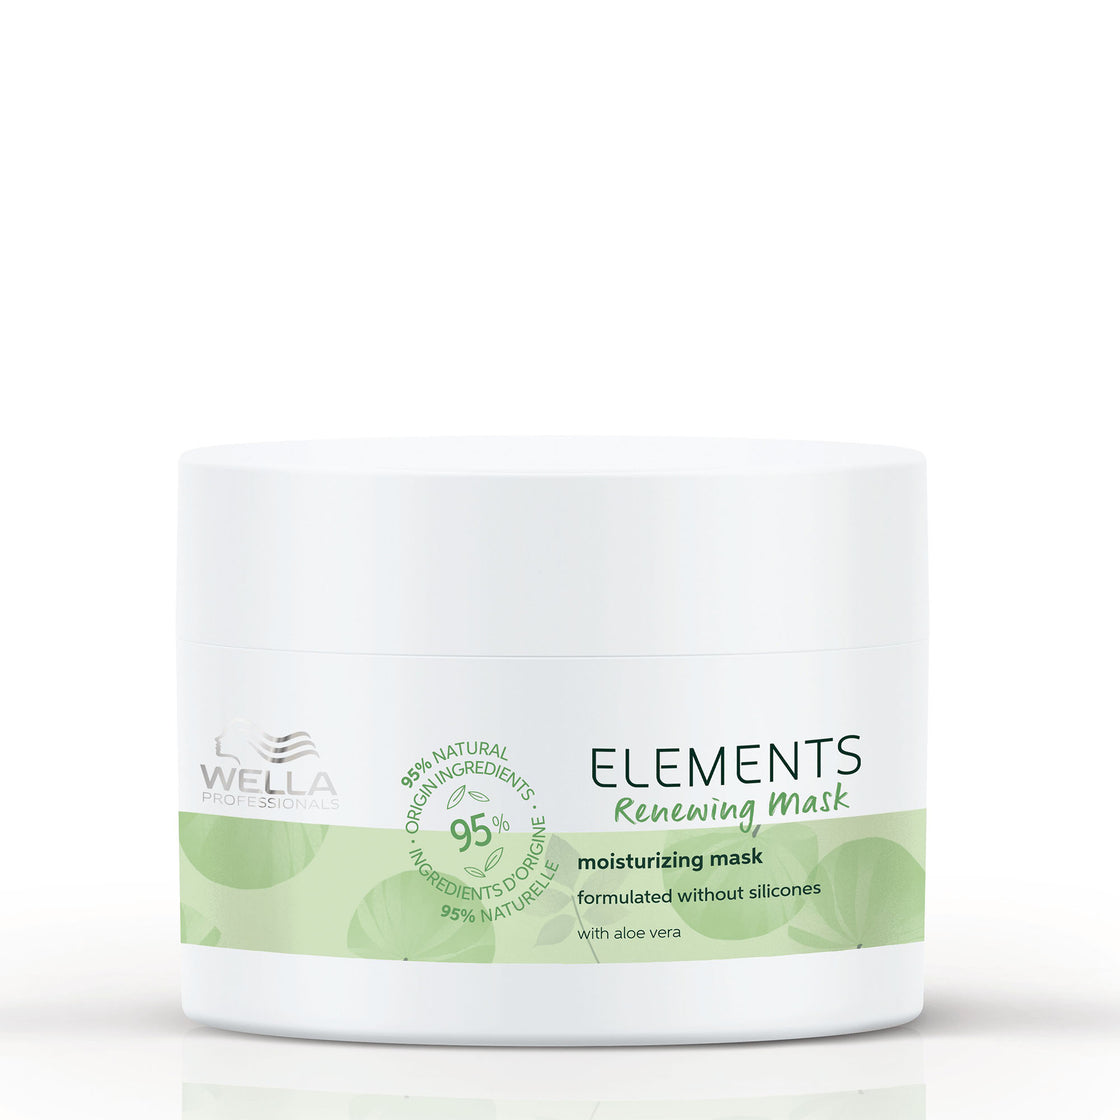 Wella Professionals Elements Shampoo And Mask Regime For Chemically Treated Hair-3